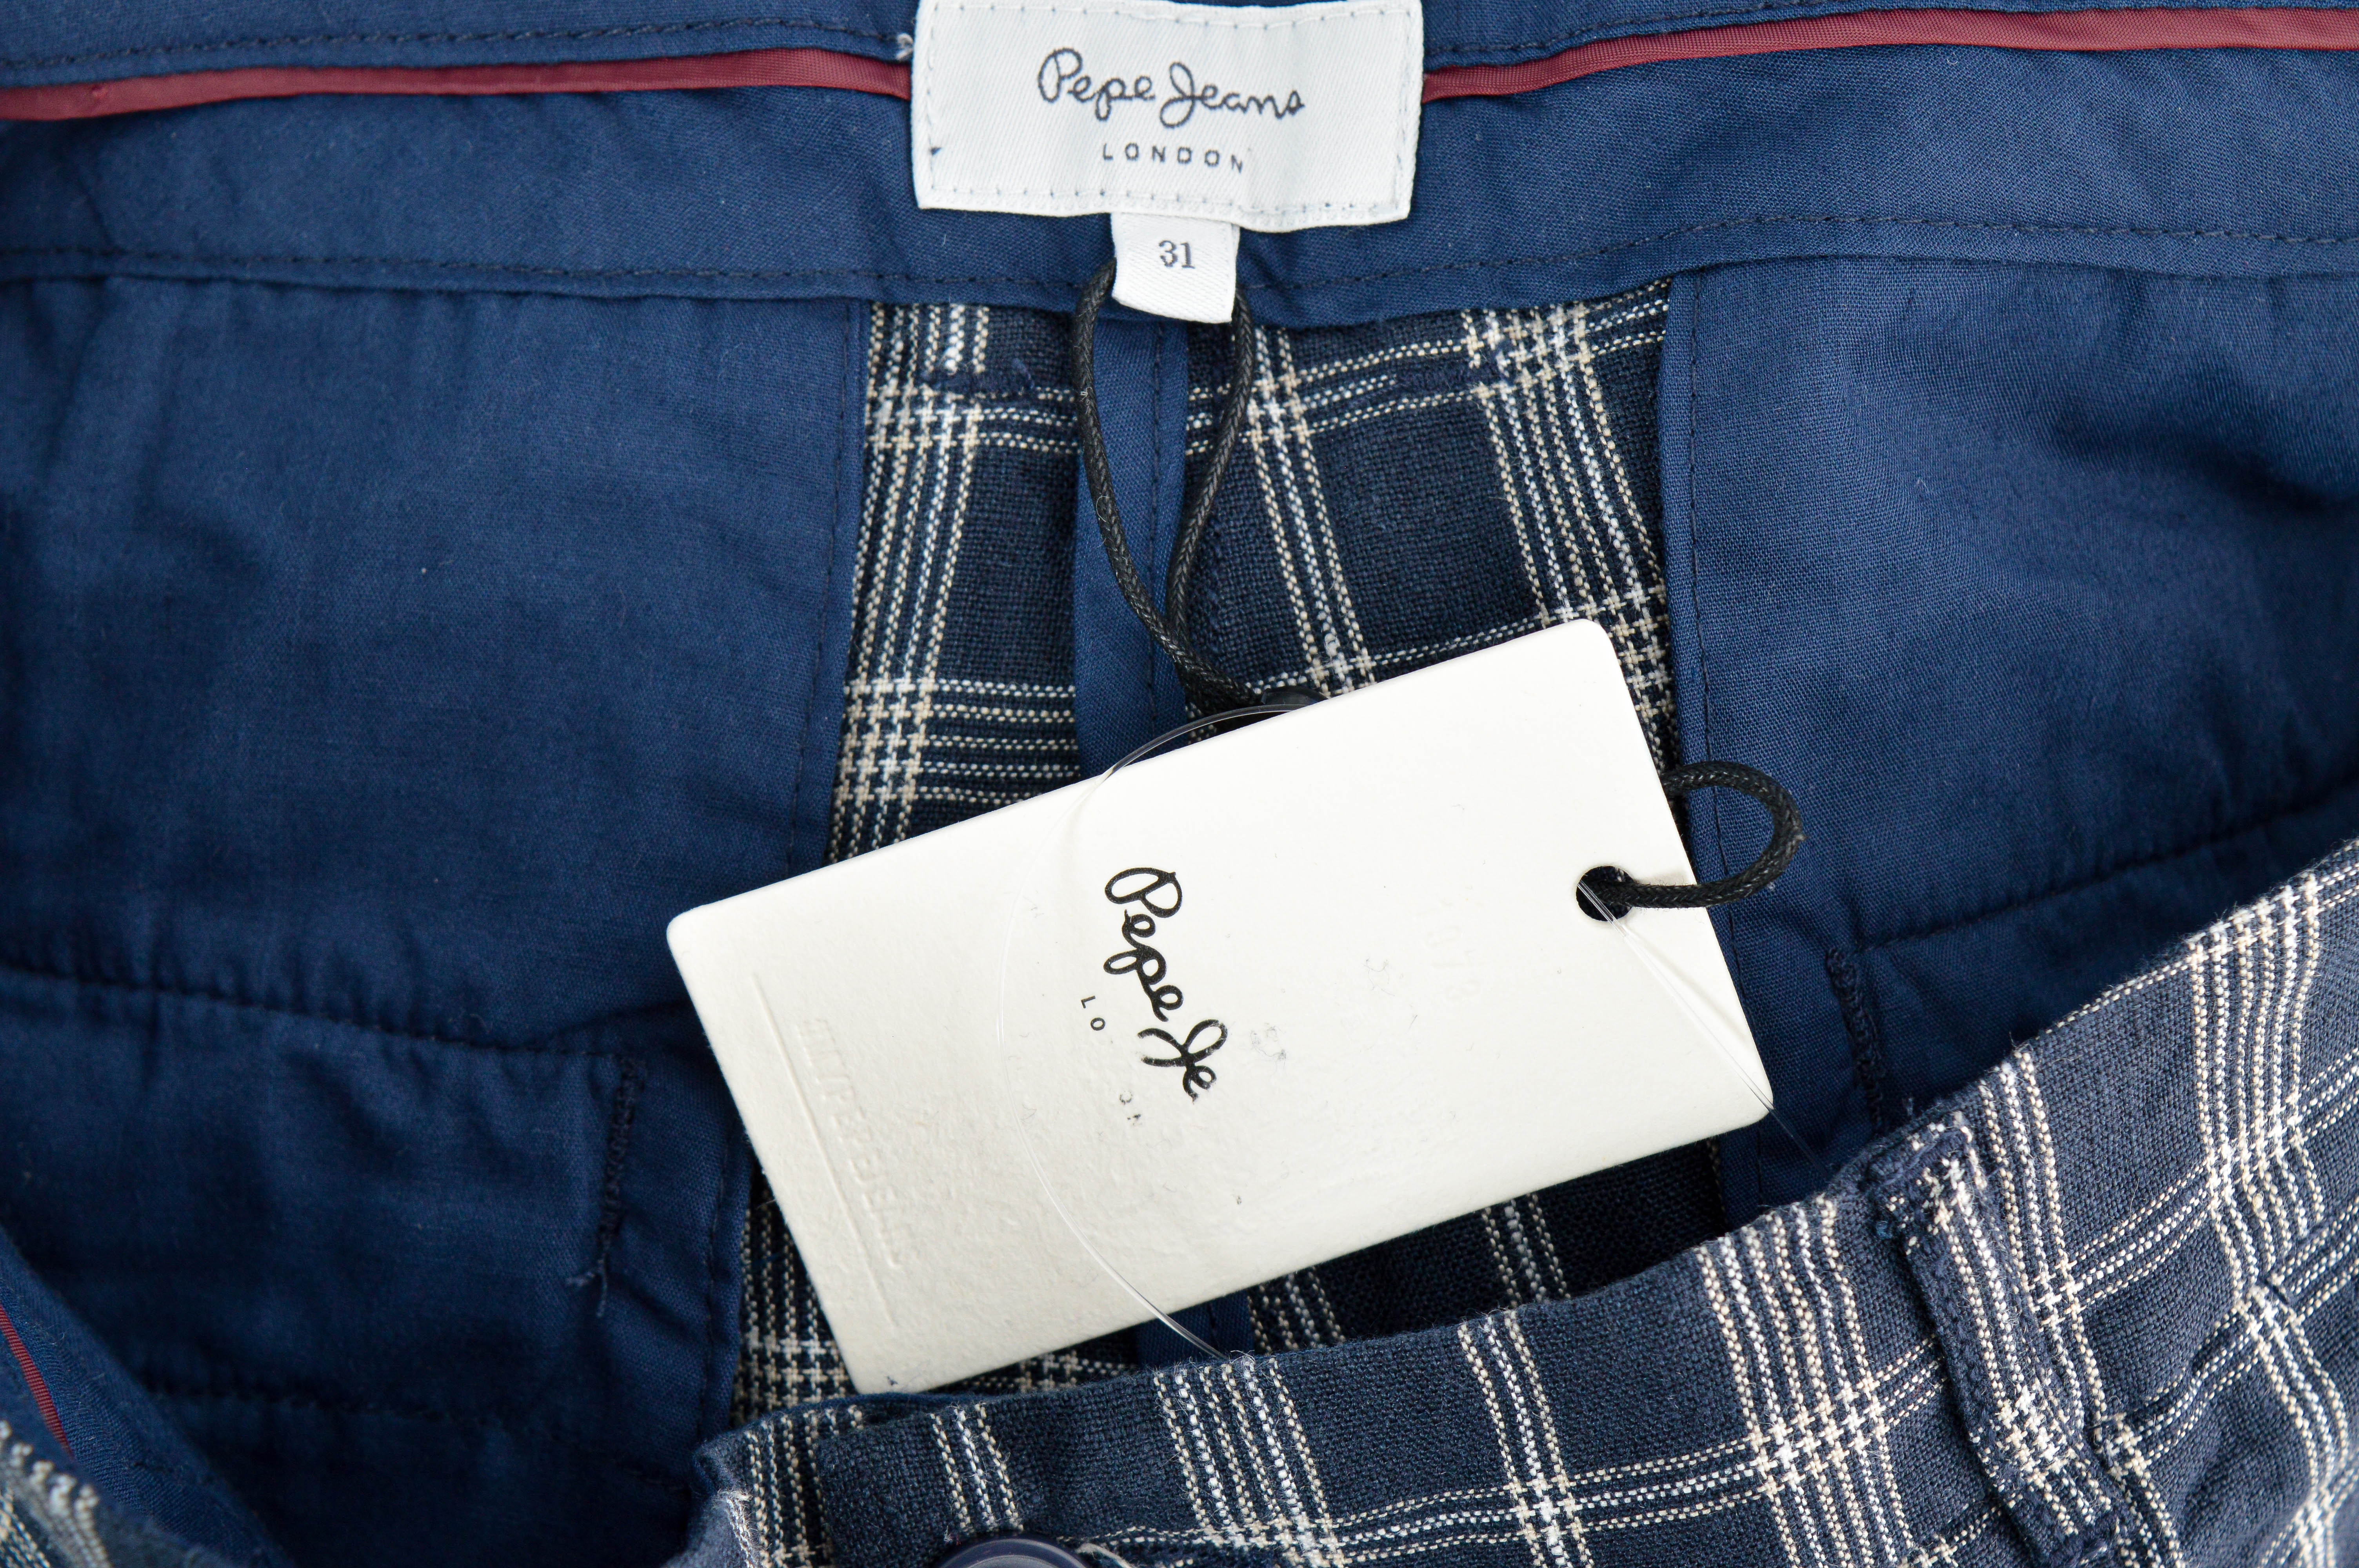 Men's trousers - Pepe Jeans - 2